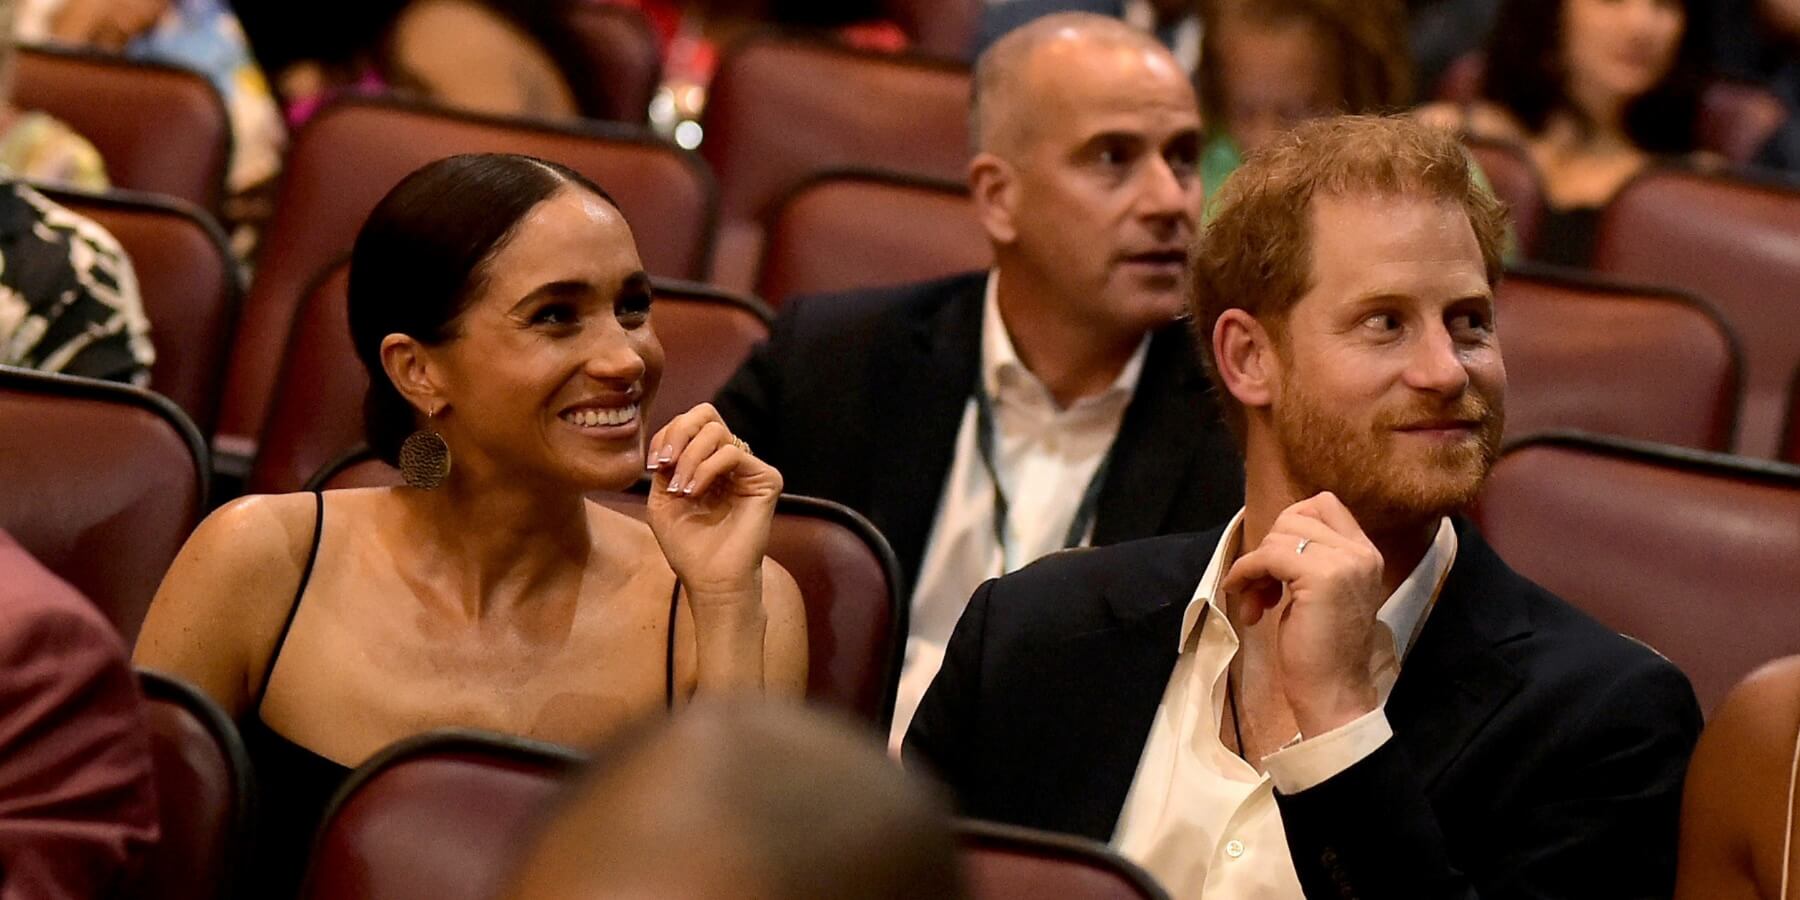 Meghan Markle and Prince Harry smile while seated in a theater.